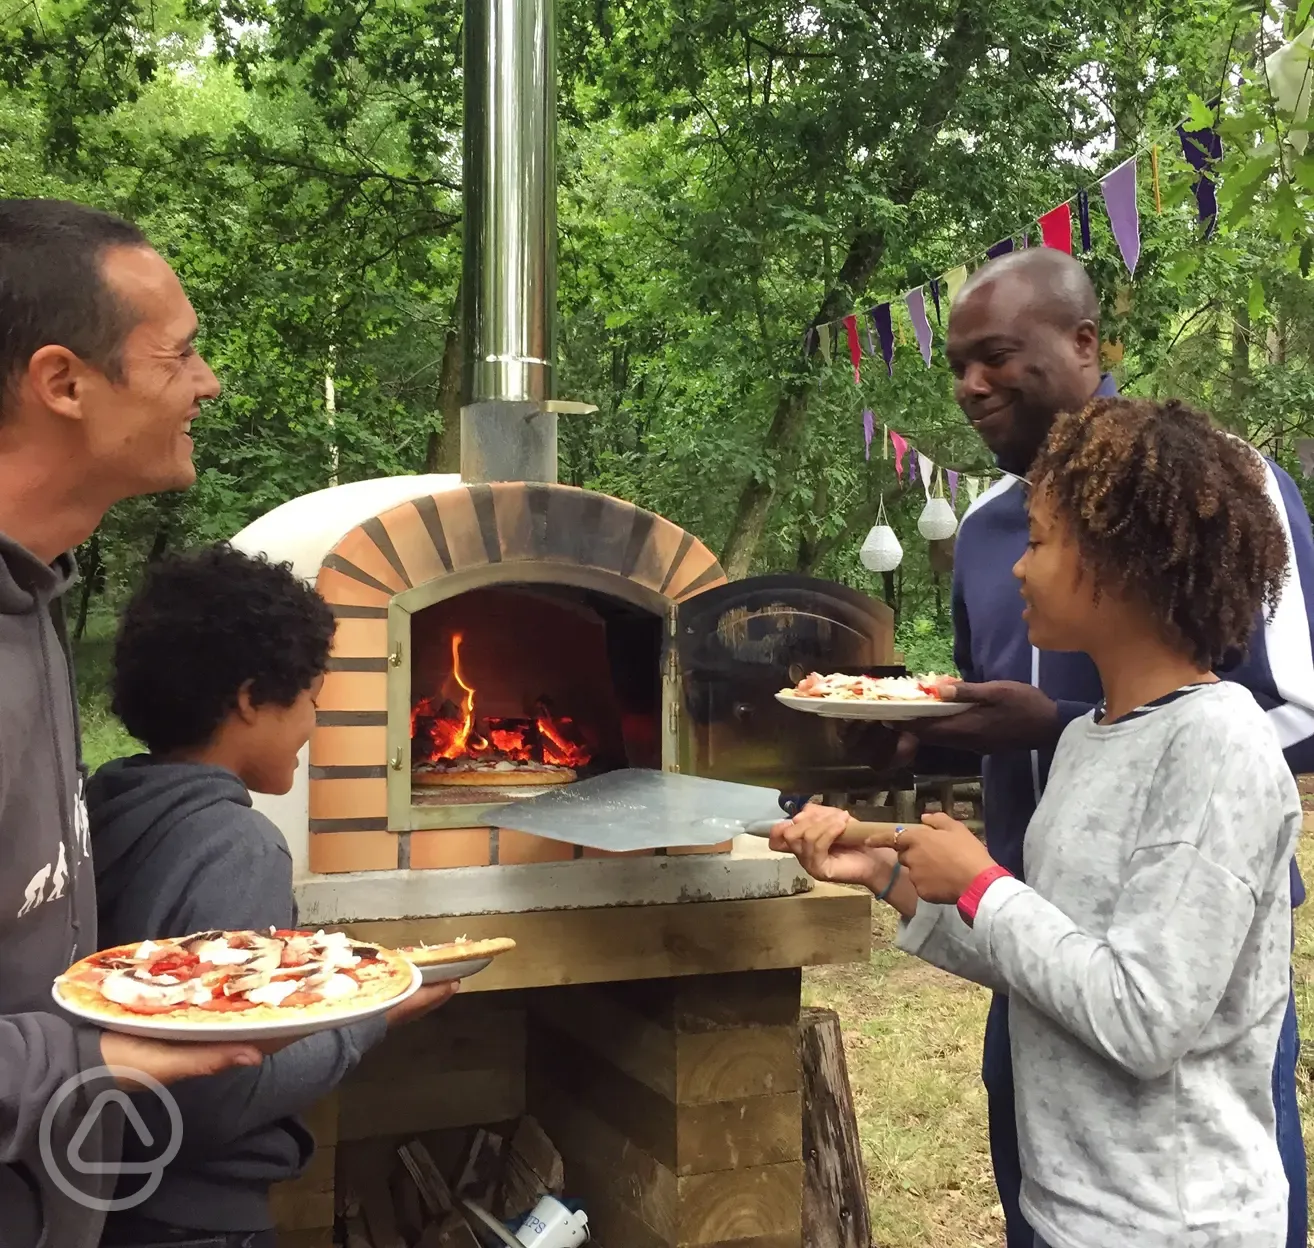 Cook together using our wood fired pizza oven! 